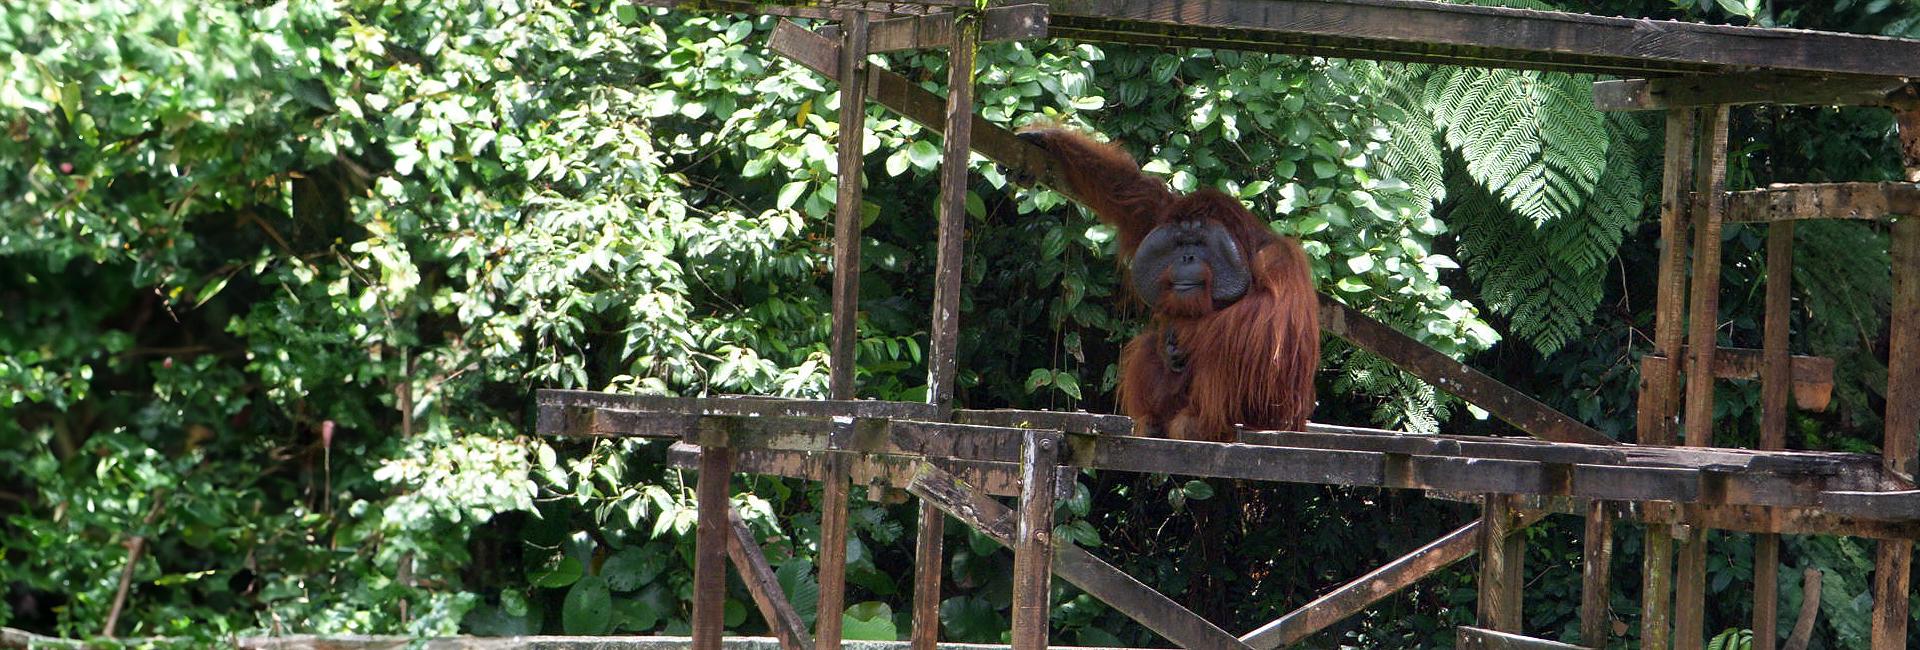 'Being so close to the beautiful orangutans was amazing' - Read Erika's Review Of The Great Orangutan Project!